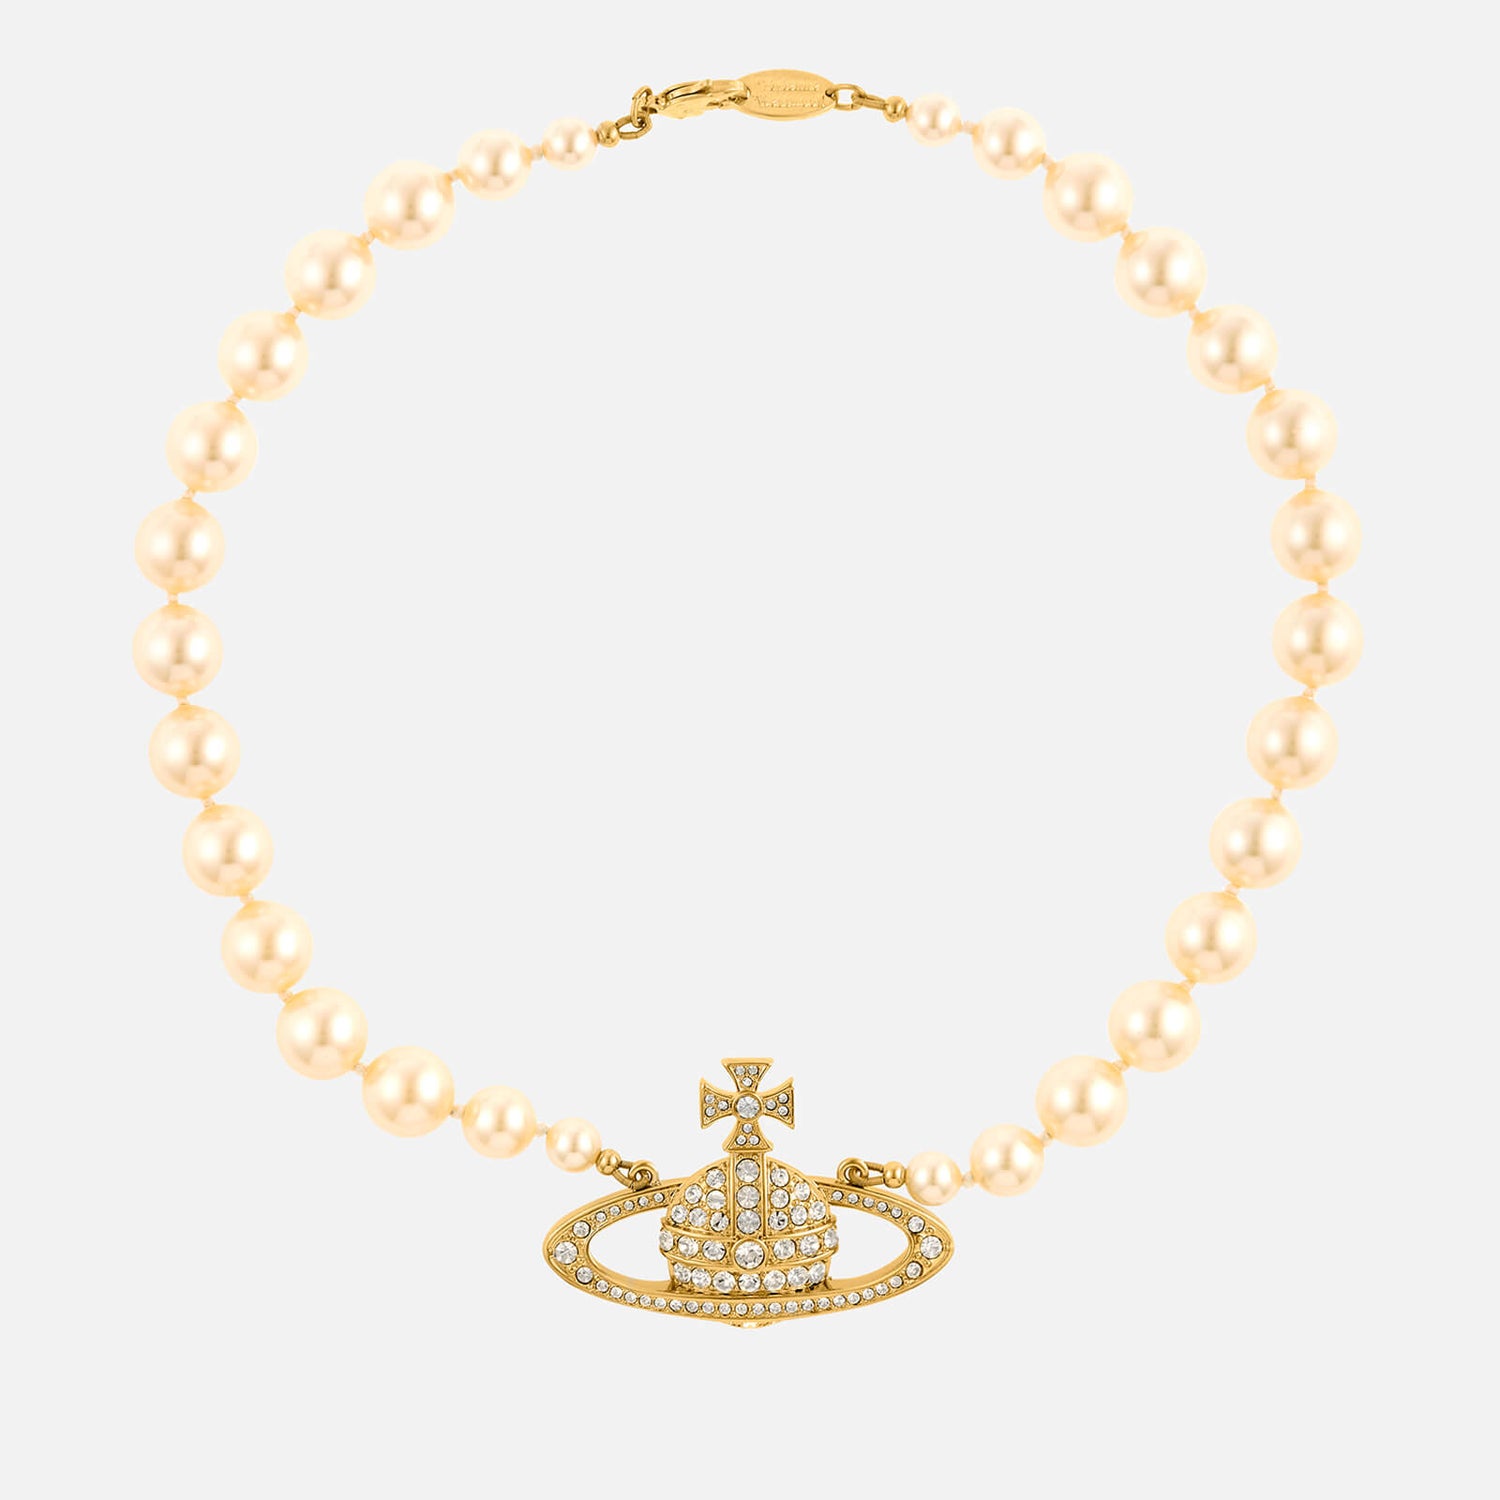 Vivienne Westwood Bas Relief Gold-Tone, Faux Pearl and Crystal Choker